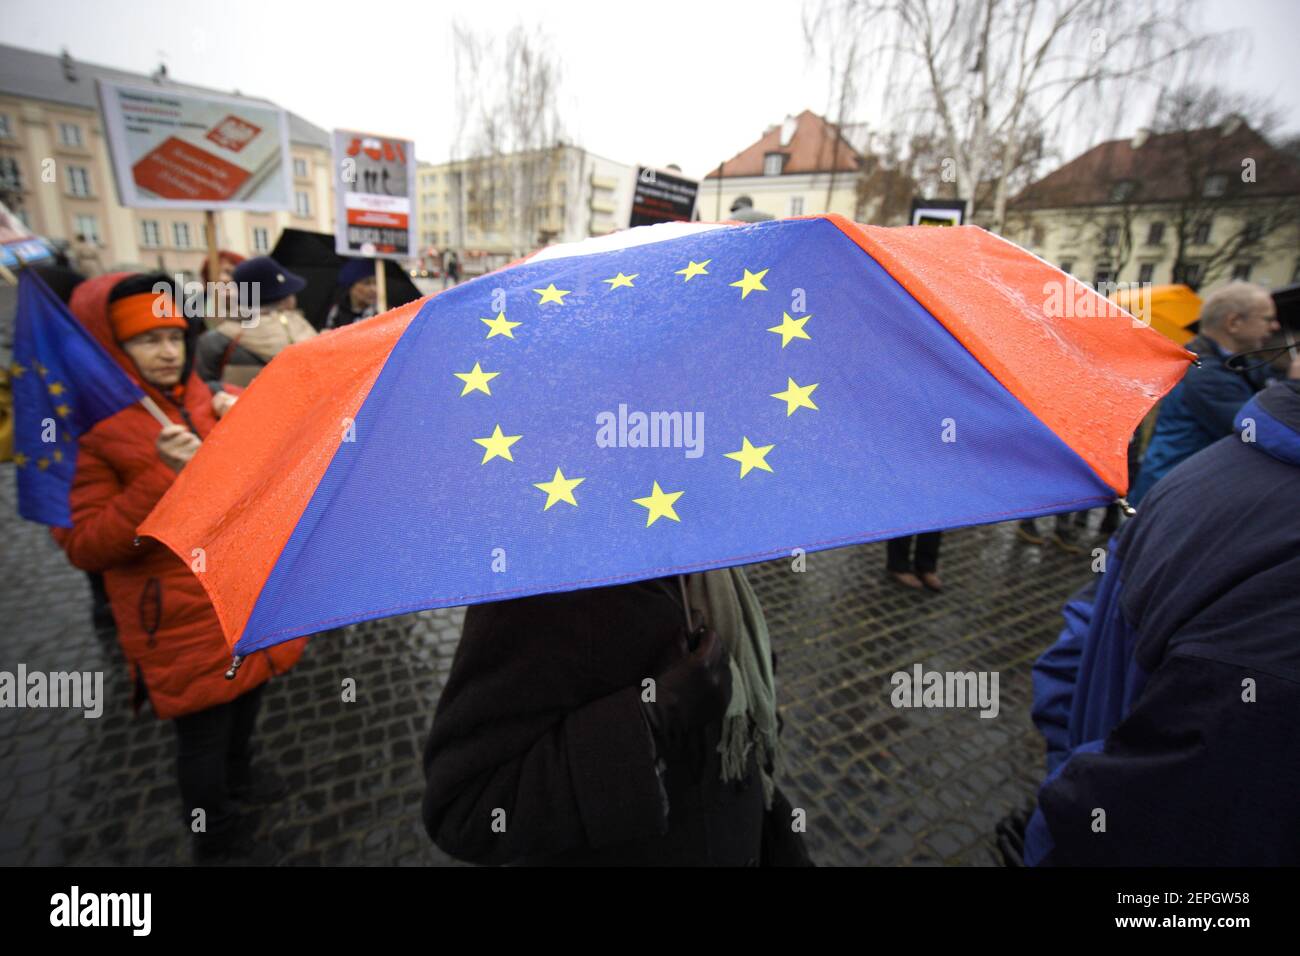 A woman holds an umbrella with an EU flag depicted on it during a  demonstration in Warsaw, Poland on December 23, 21019 against the sudden  suspension of Pawel Juszczyszyn. Juszczyszyn is a